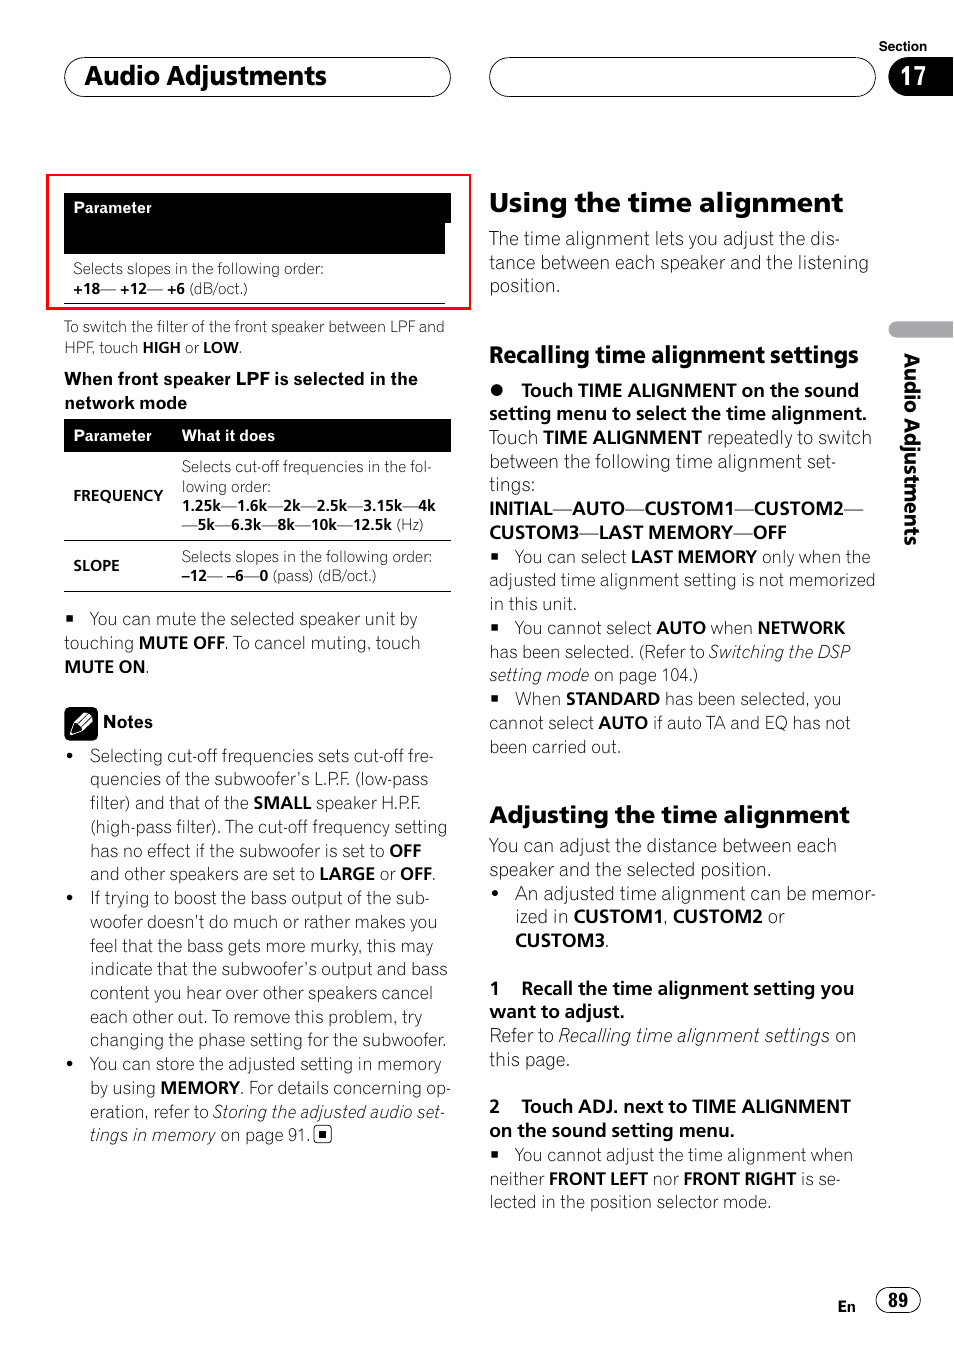 Using the time alignment, Adjusting the time alignment, Audio adjustments | Recalling time alignment settings | Pioneer SUPERTUNERIIID+ AVH-P7850DVD User Manual | Page 89 / 132